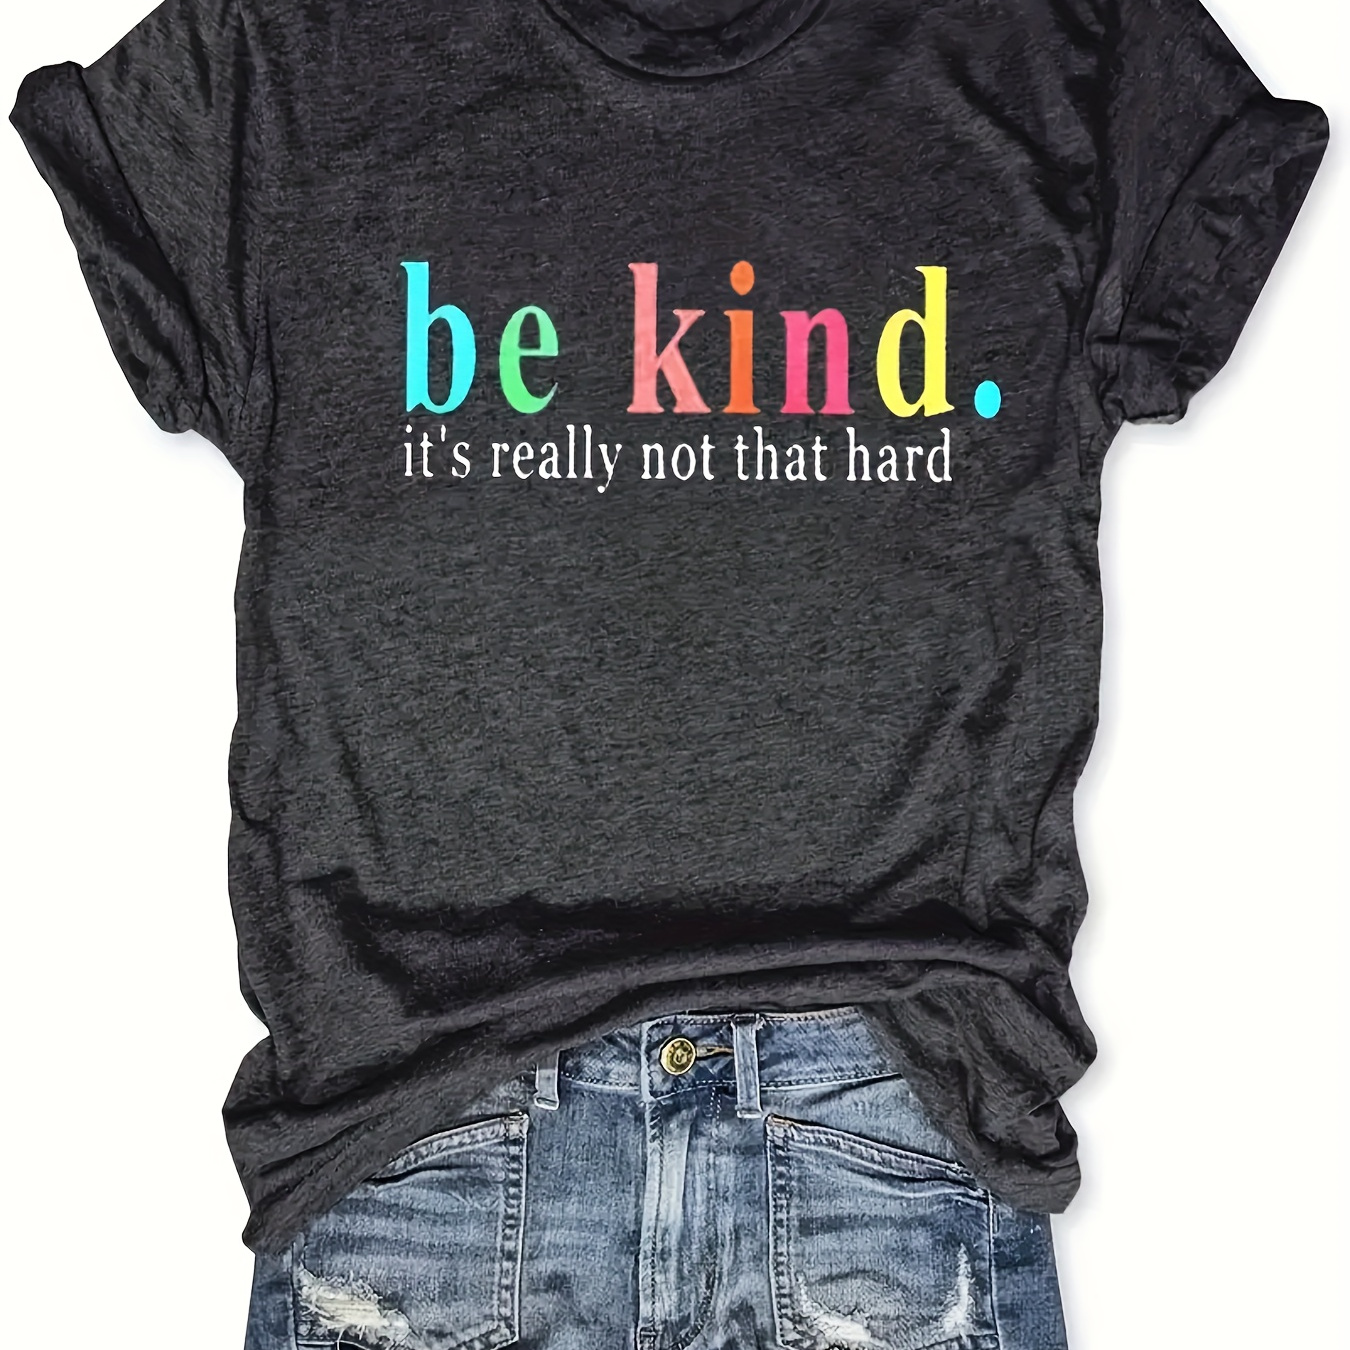 

Be Kind Print T-shirt, Casual Short Sleeve Crew Neck Top For Spring & Summer, Women's Clothing